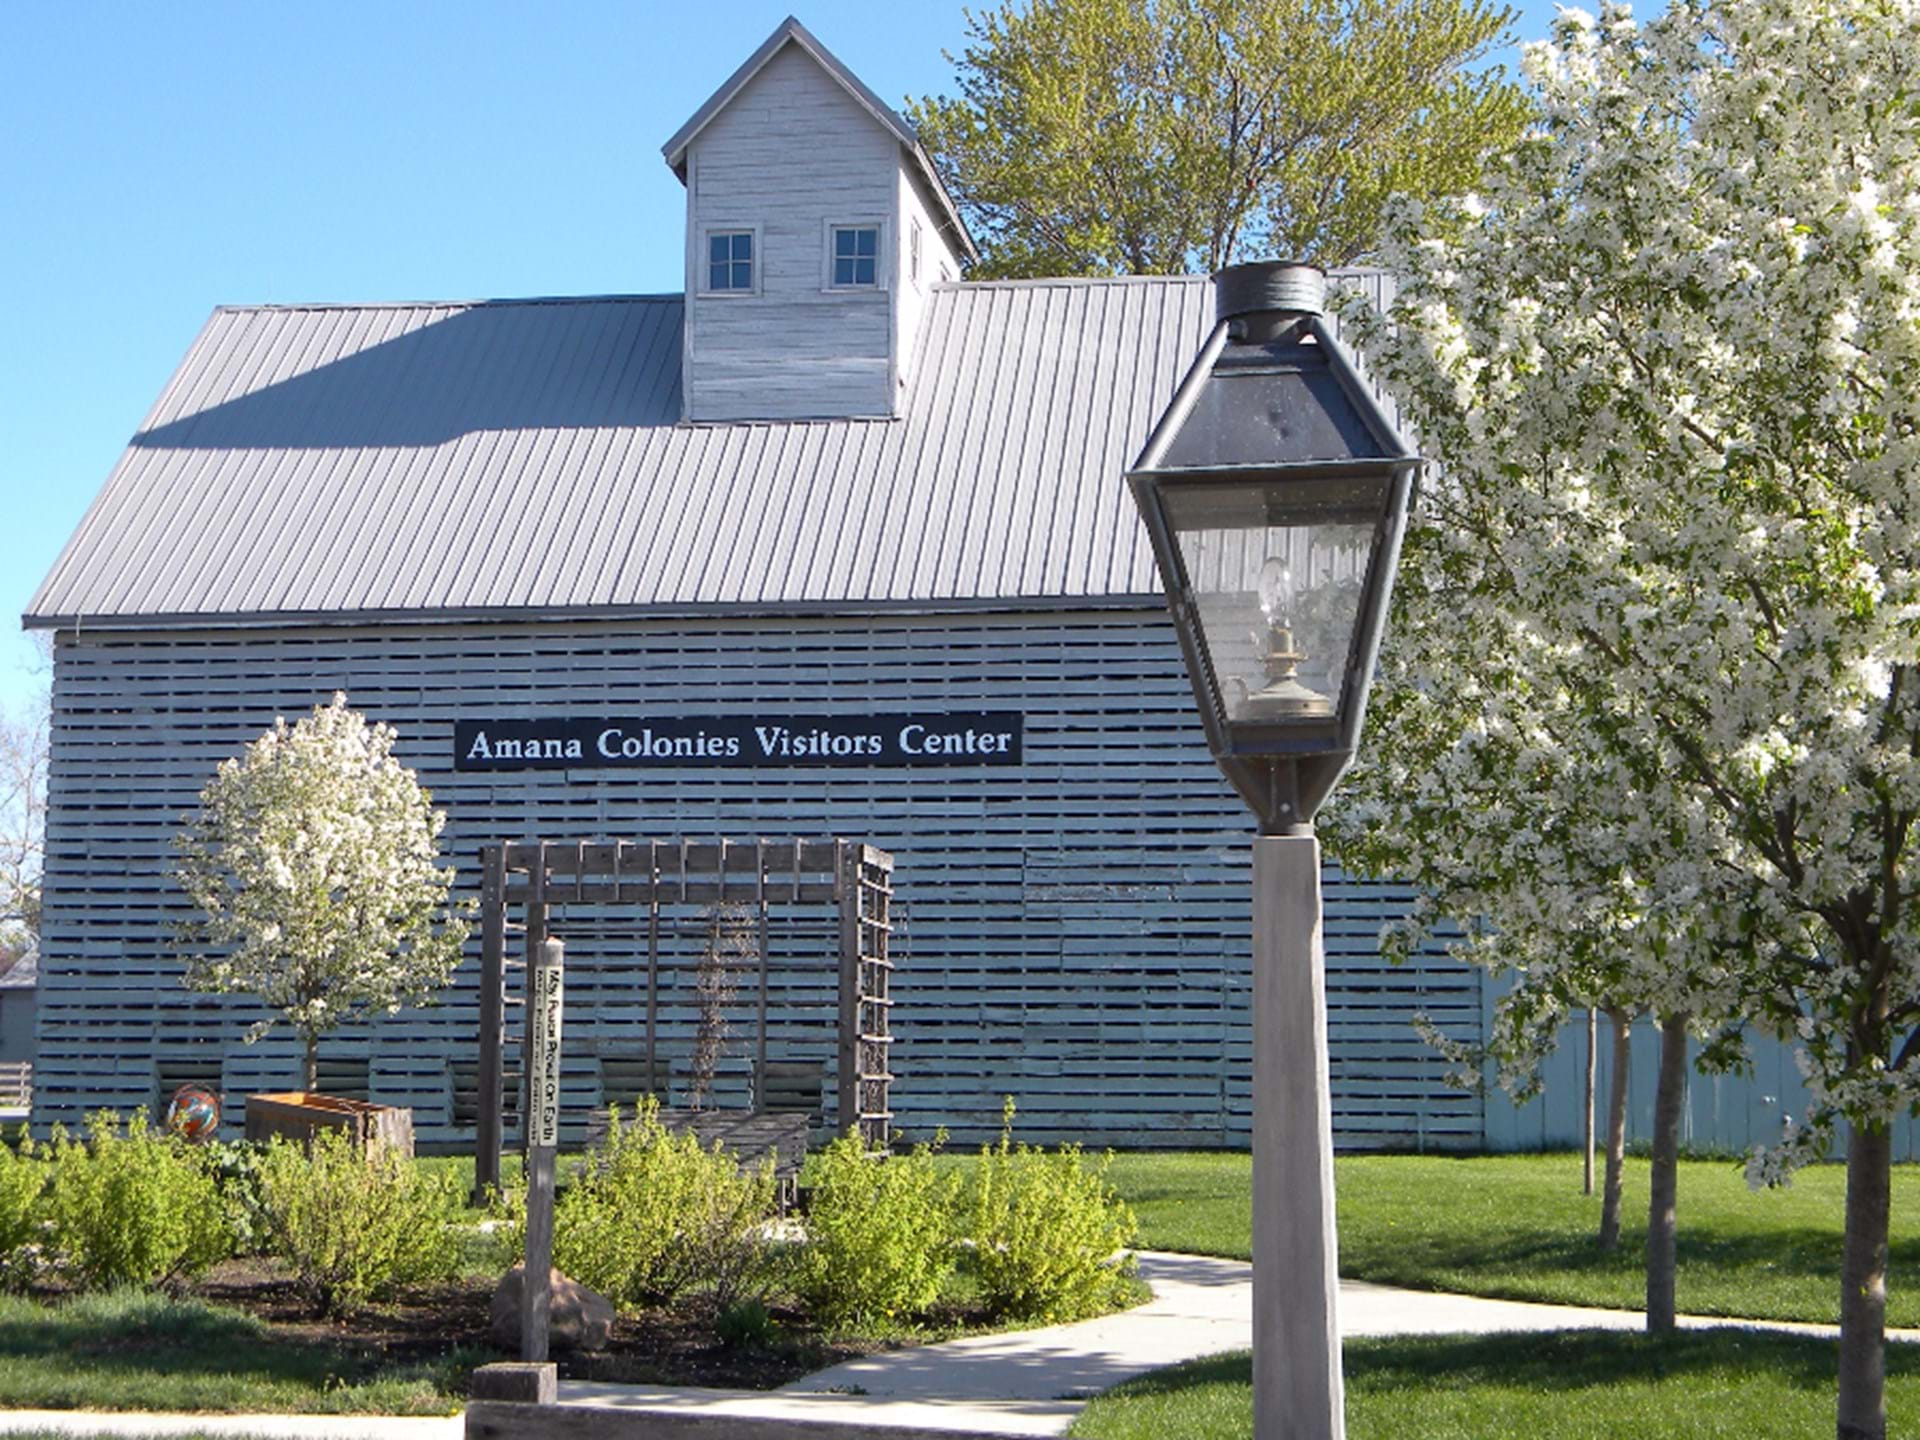 Amana Colonies Visitor Center